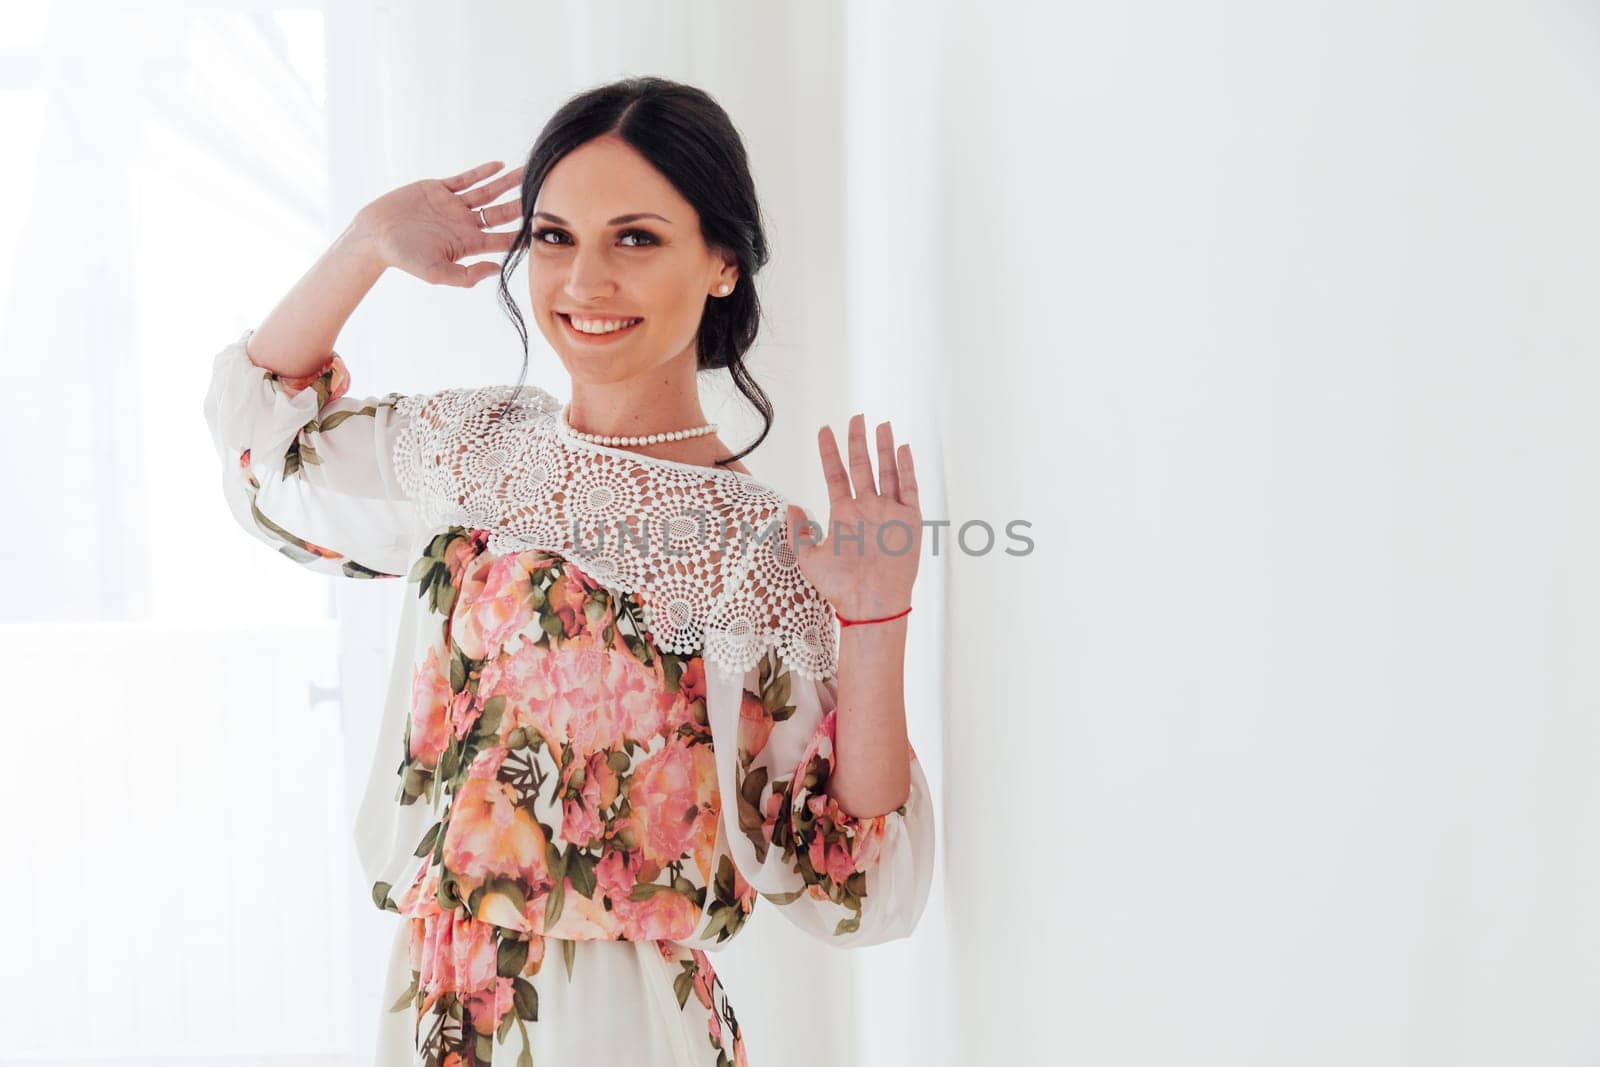 Portrait of a woman in a dress with flowers in a white room